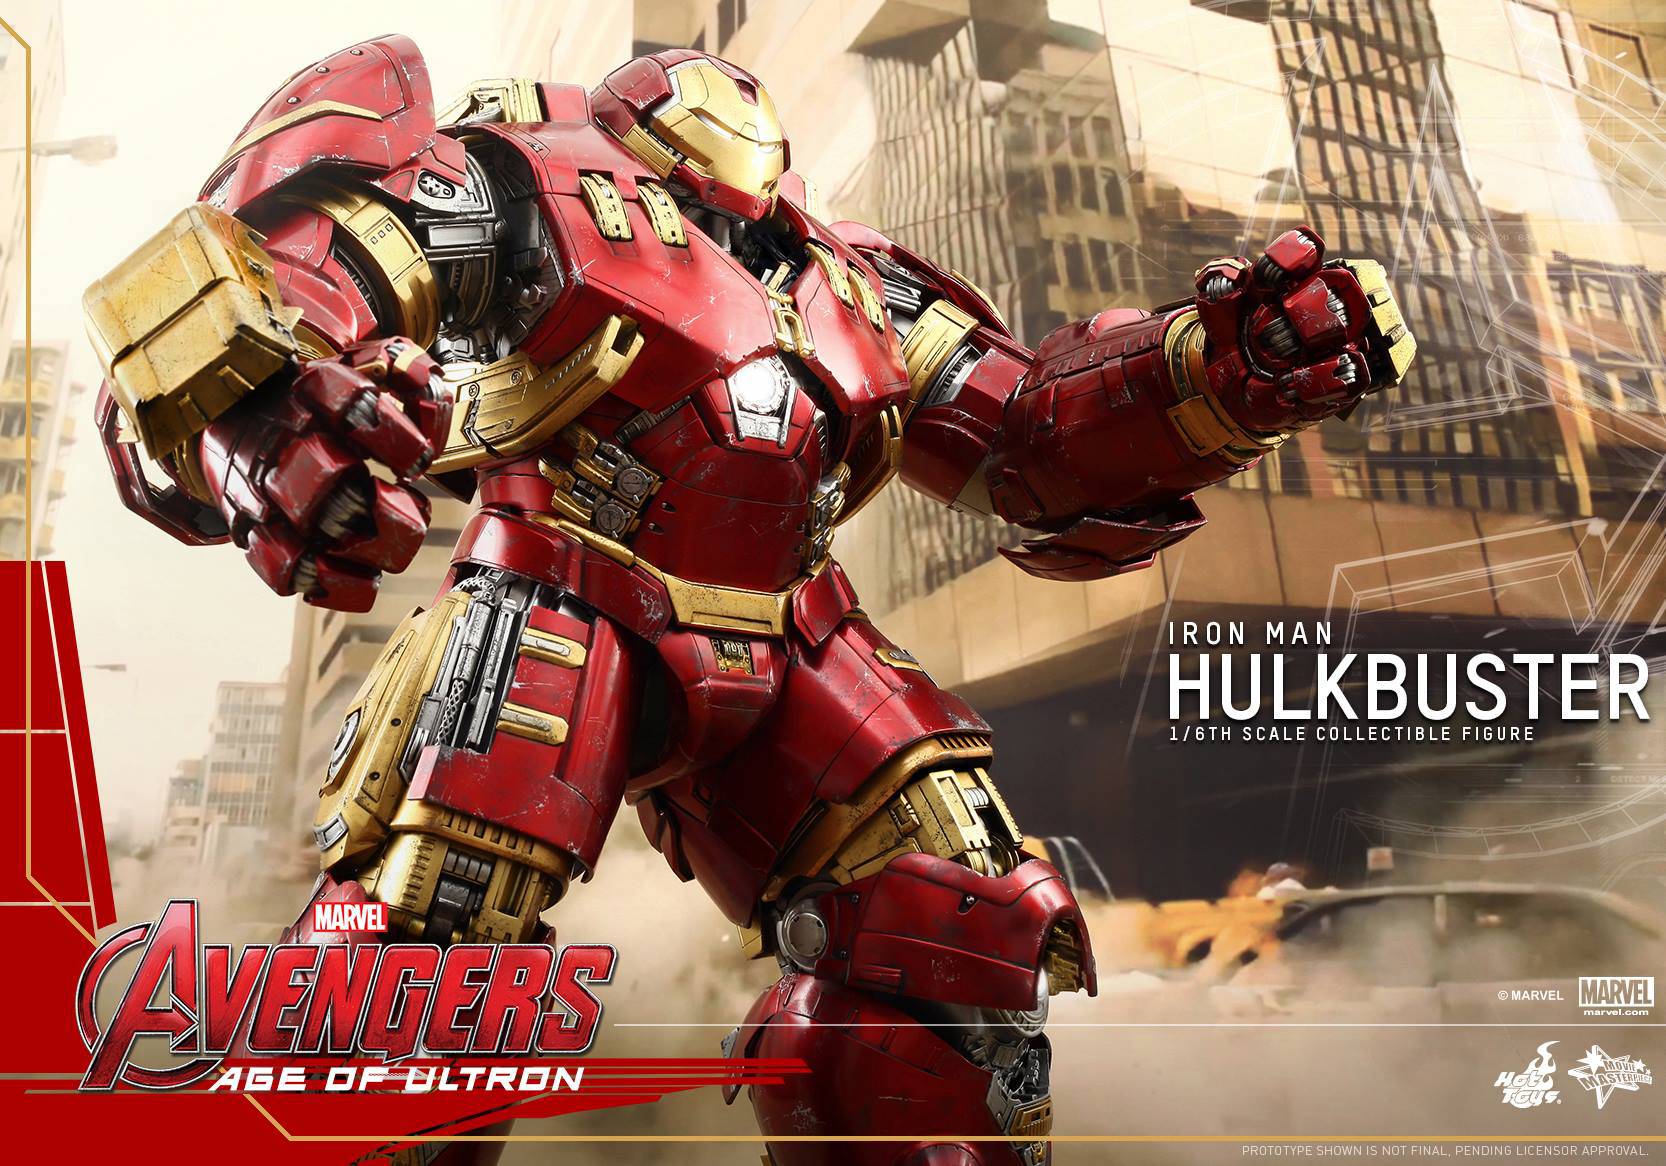 Hot Toys "Avengers: Age of Ultron" Hulkbuster